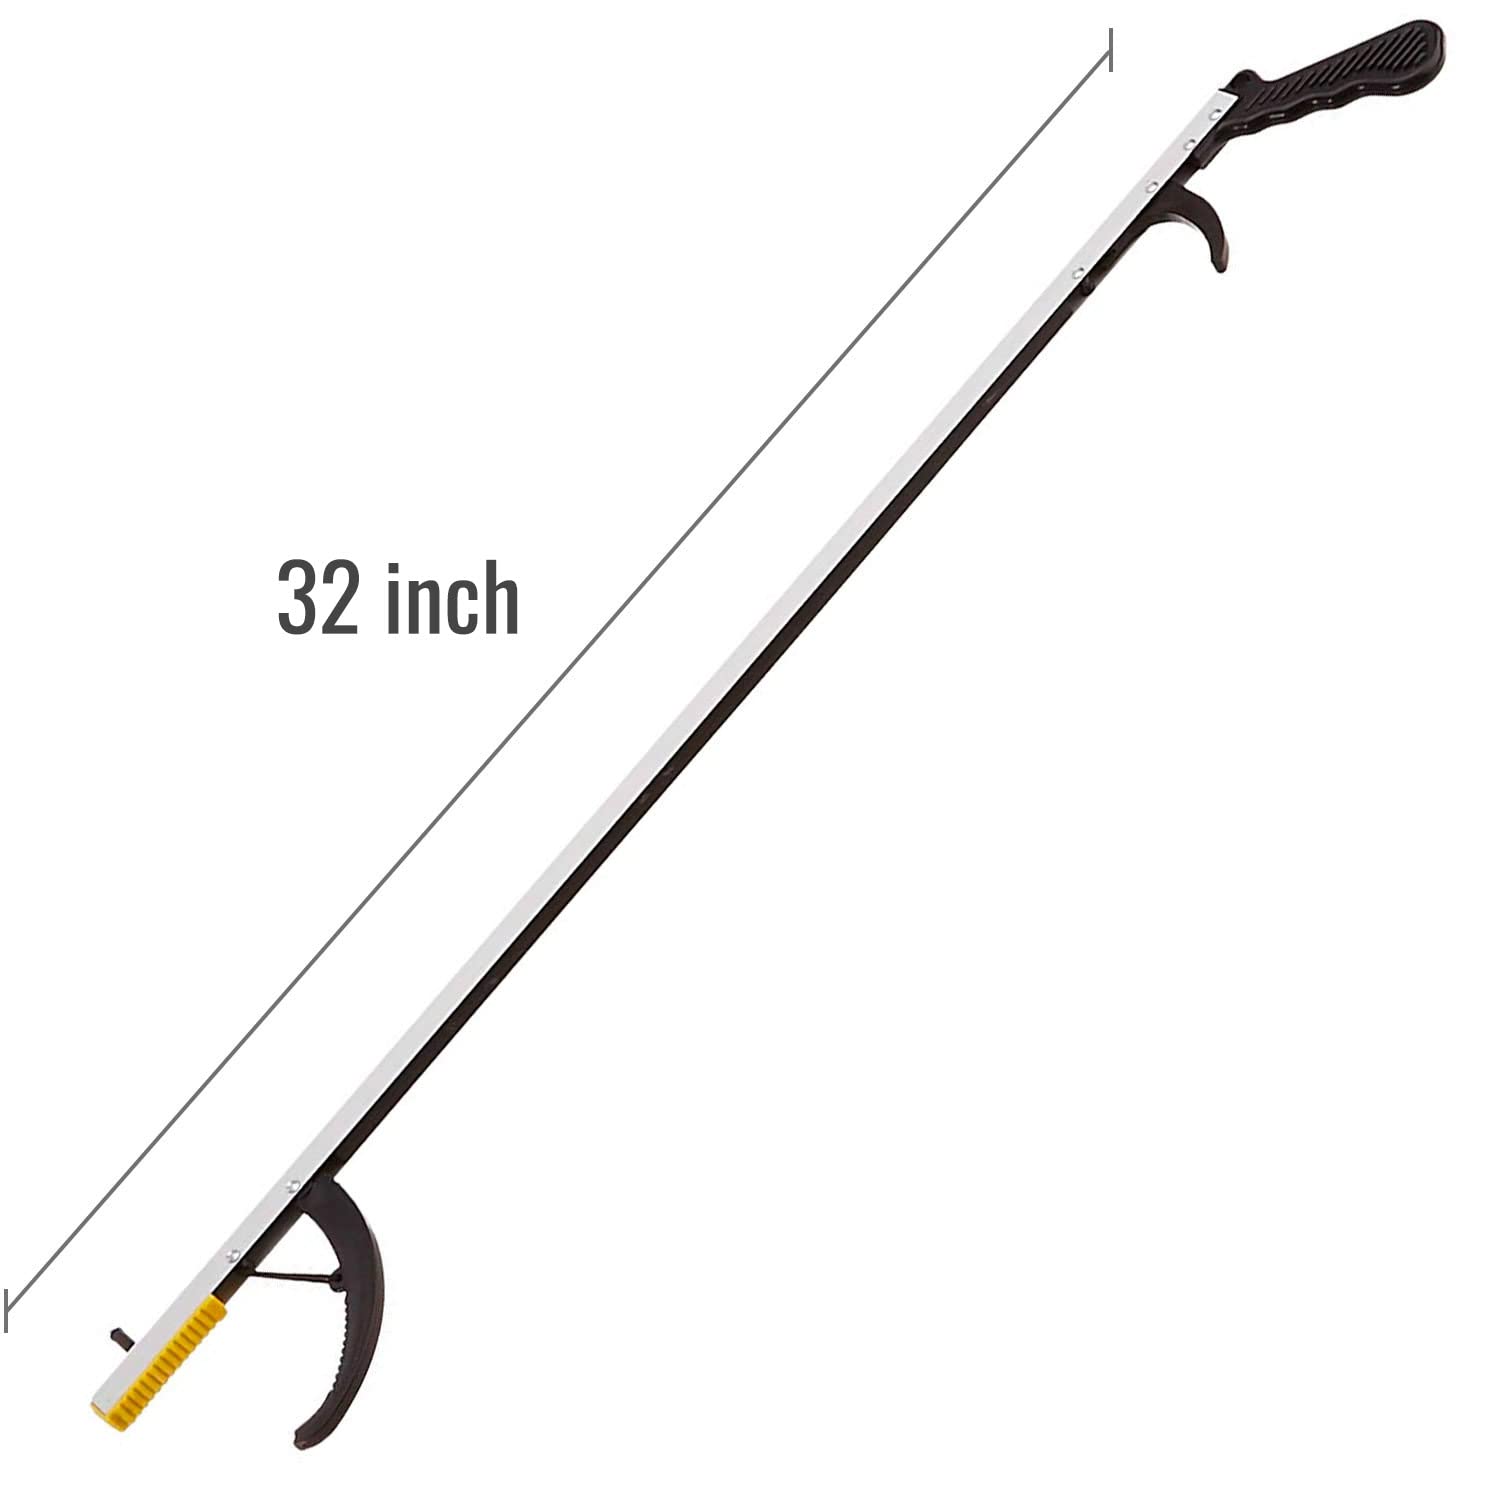 HealthSmart Reacher Grabber Tool for Elderly, Disabled or After Surgery Recovery, Claw Grabber, Reaching Assist Tool, Trash Picker, Hand Gripper, Arm Extension, 32 Inches, Non Folding, Magnetic Claw